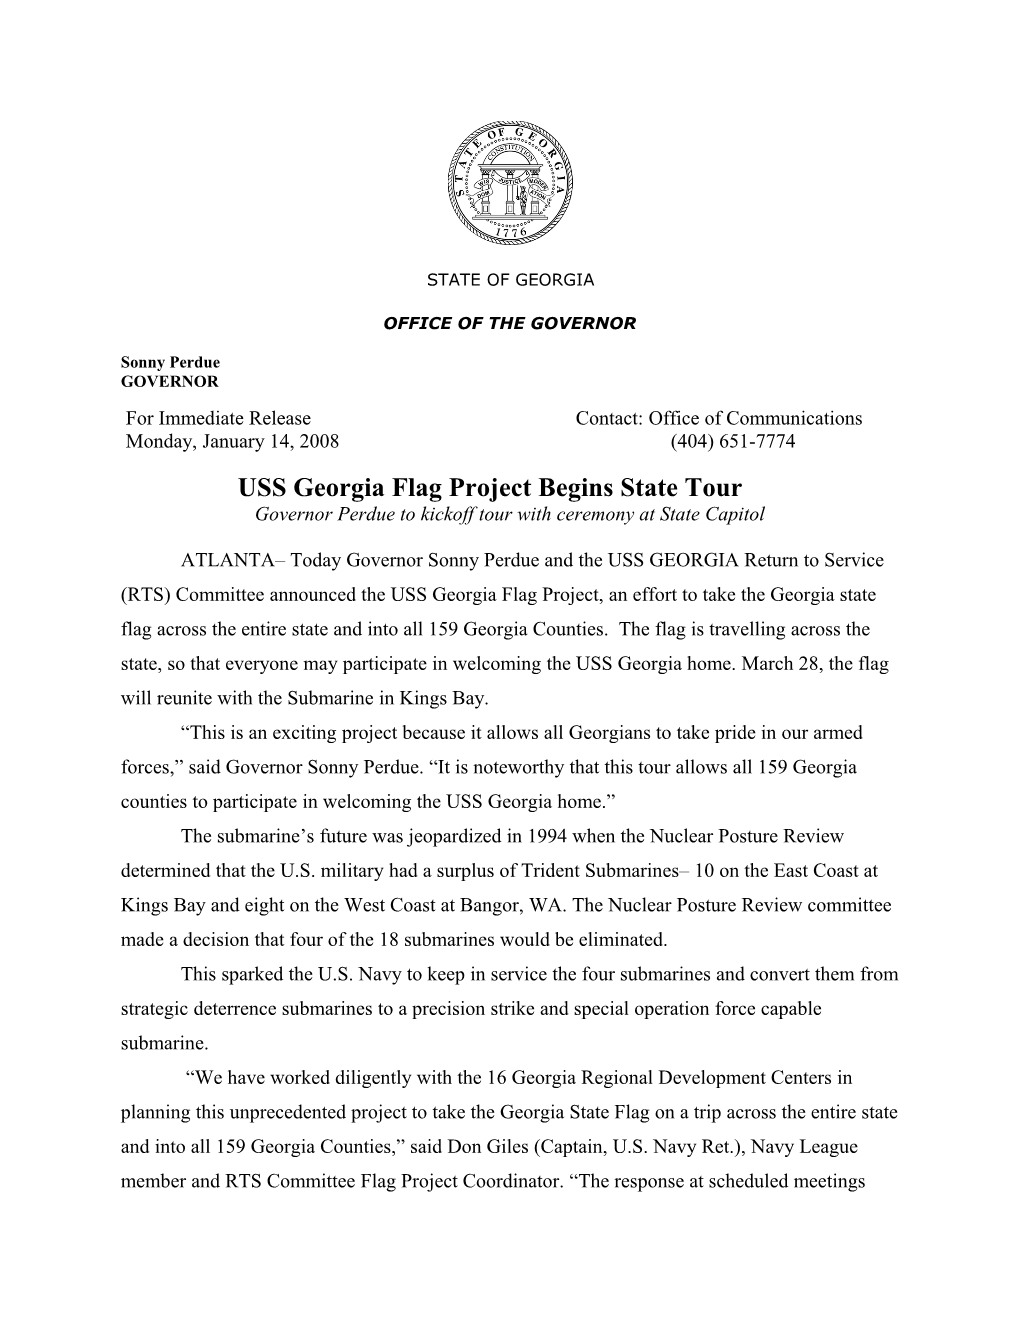 USS Georgia Flag Project Begins State Tour